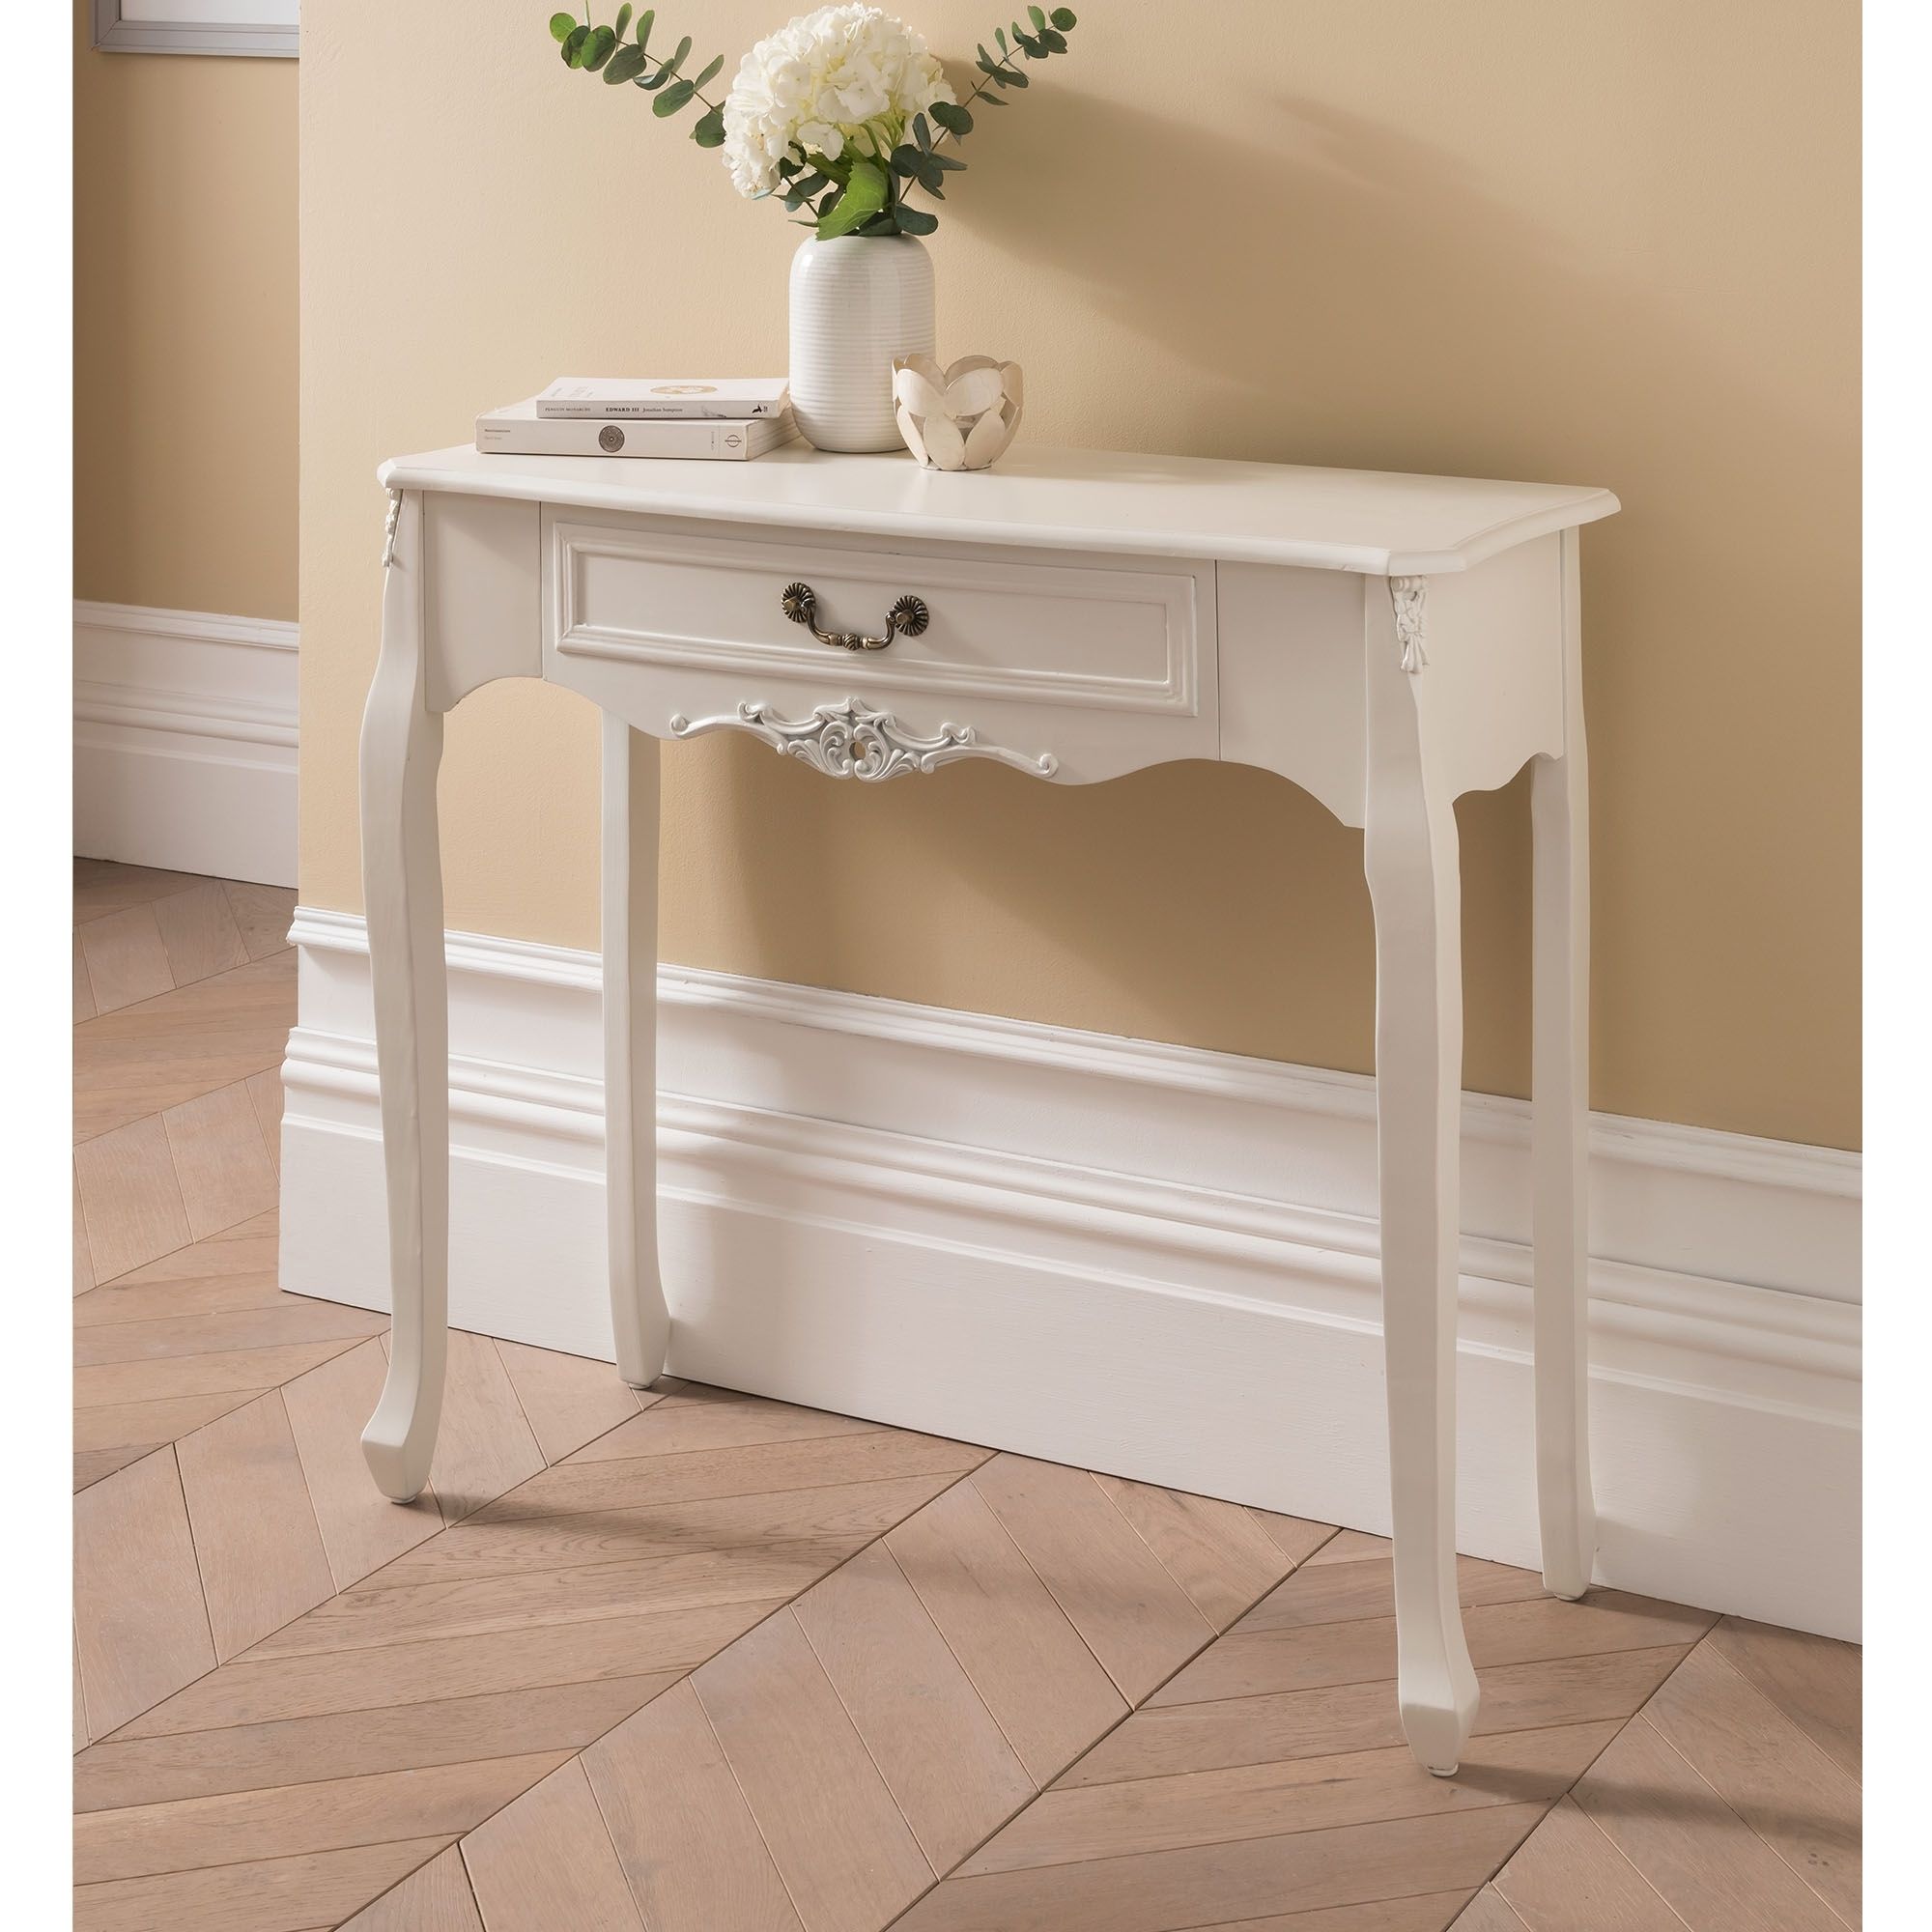 Etienne White 1 Drawer Antique French Style Console Table Within White Geometric Console Tables (View 7 of 20)